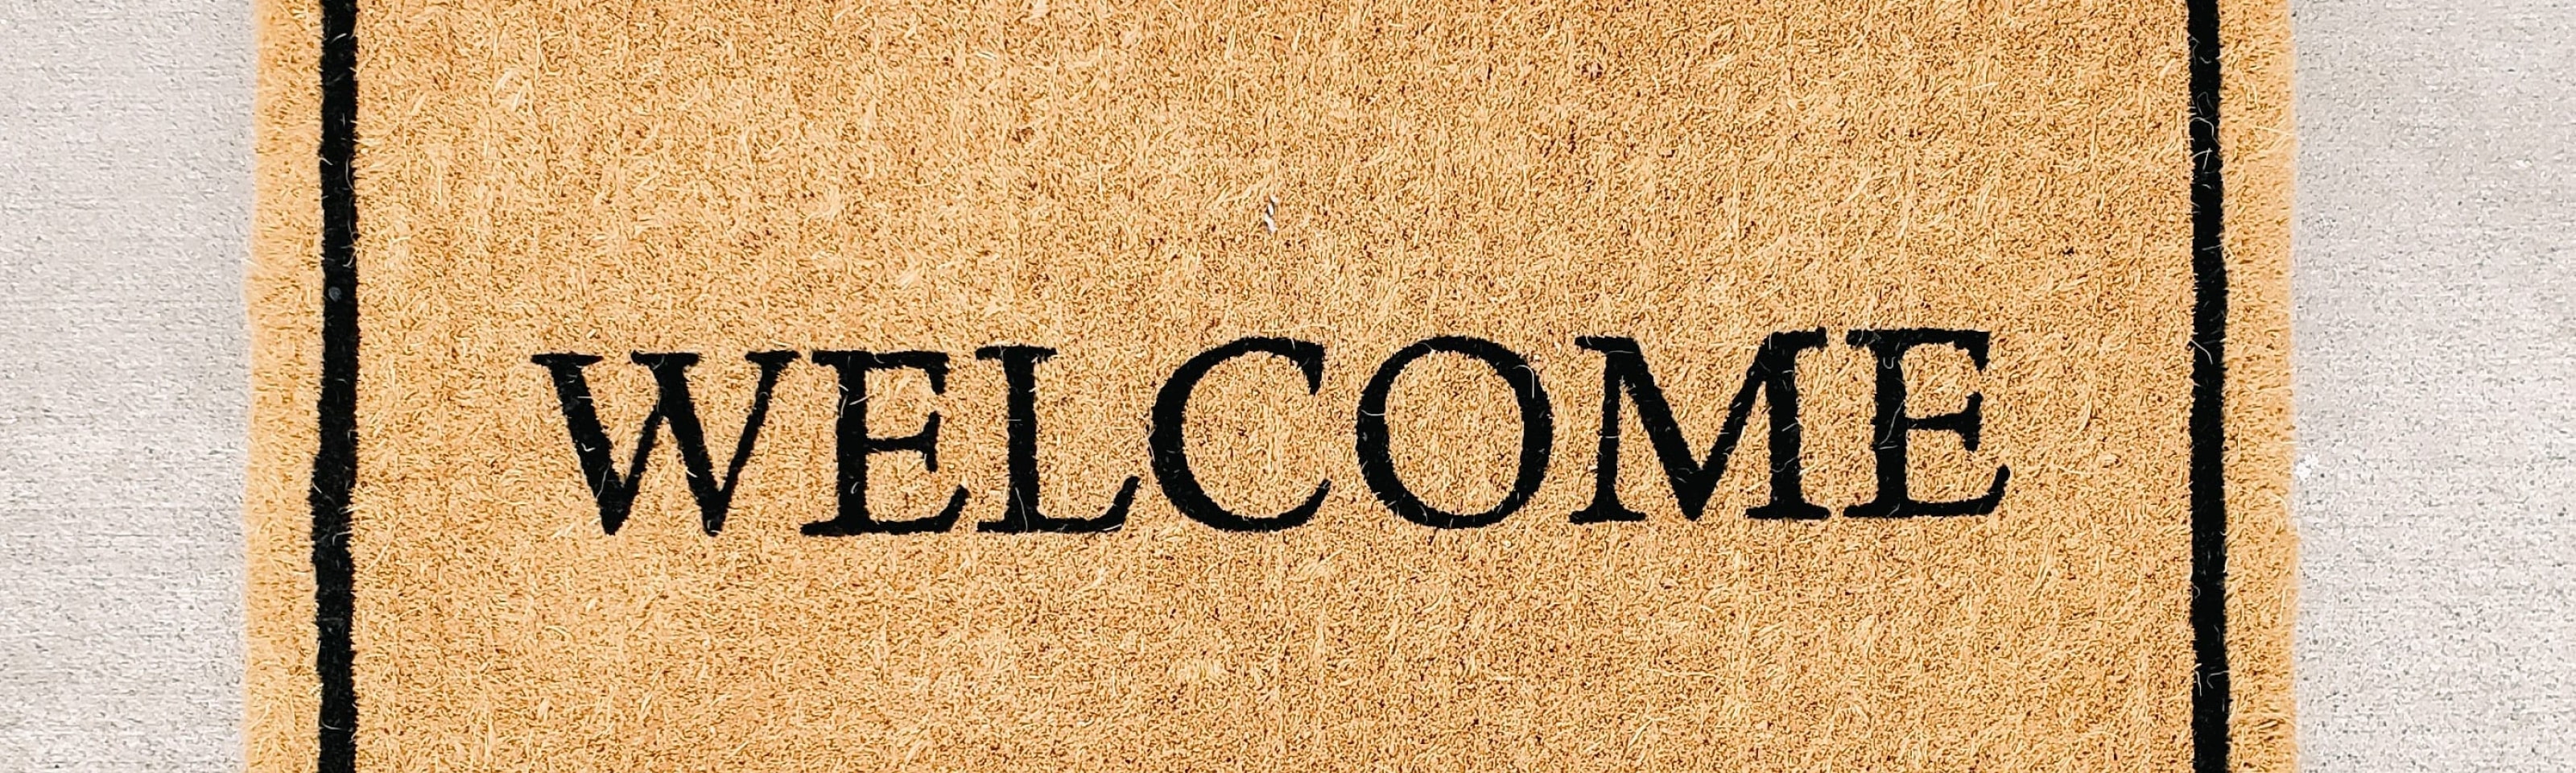 Welcome mat with lower body of person standing in front of it